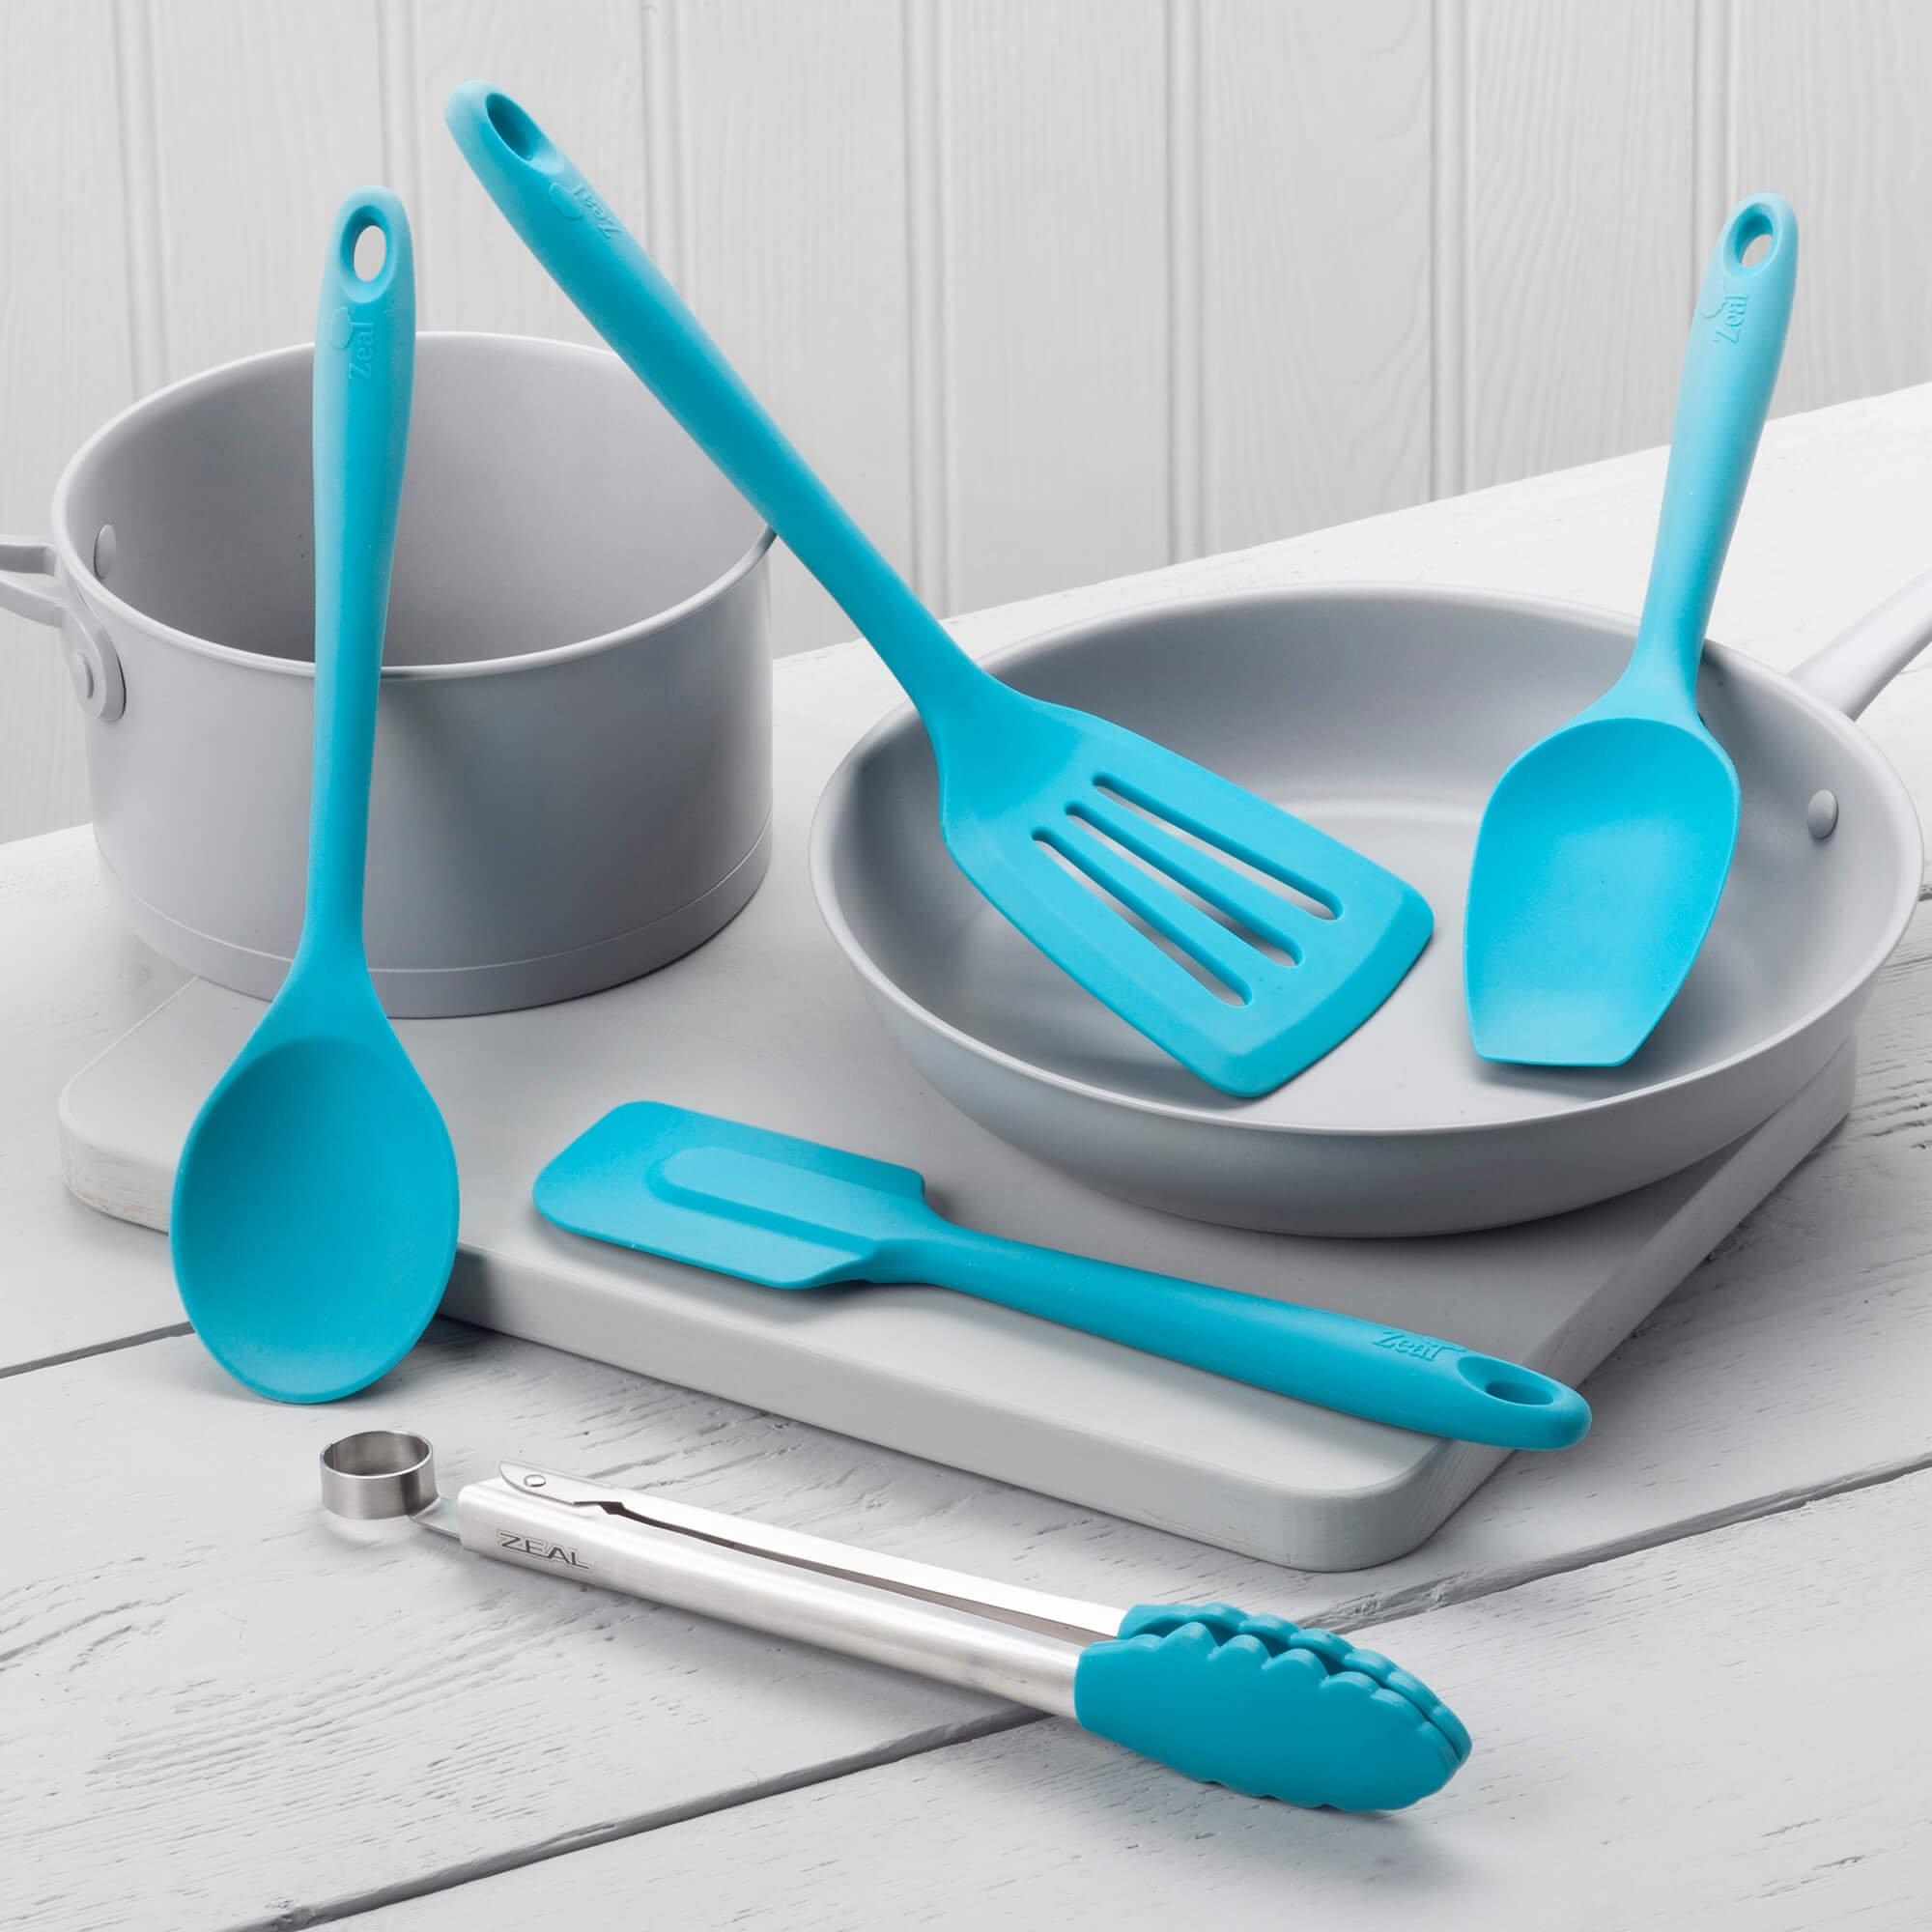 Aqua Blue Coloured Kitchen Accessories for Cooking, Serving & Dining — Page  3 — Zeal